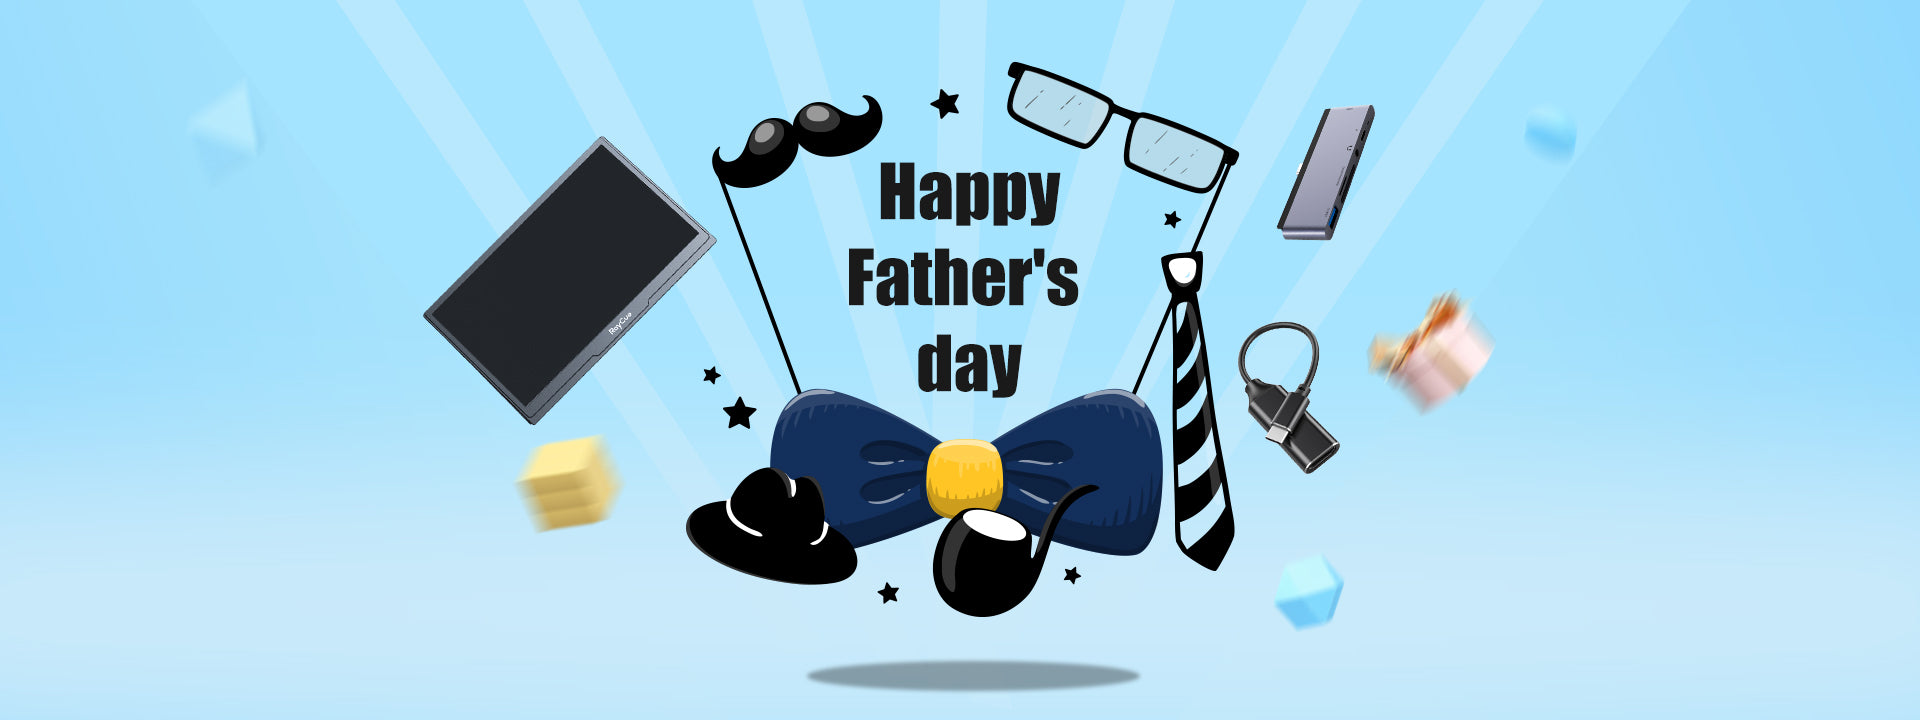 Father’s Day Gift Ideas For Your Tech Dad